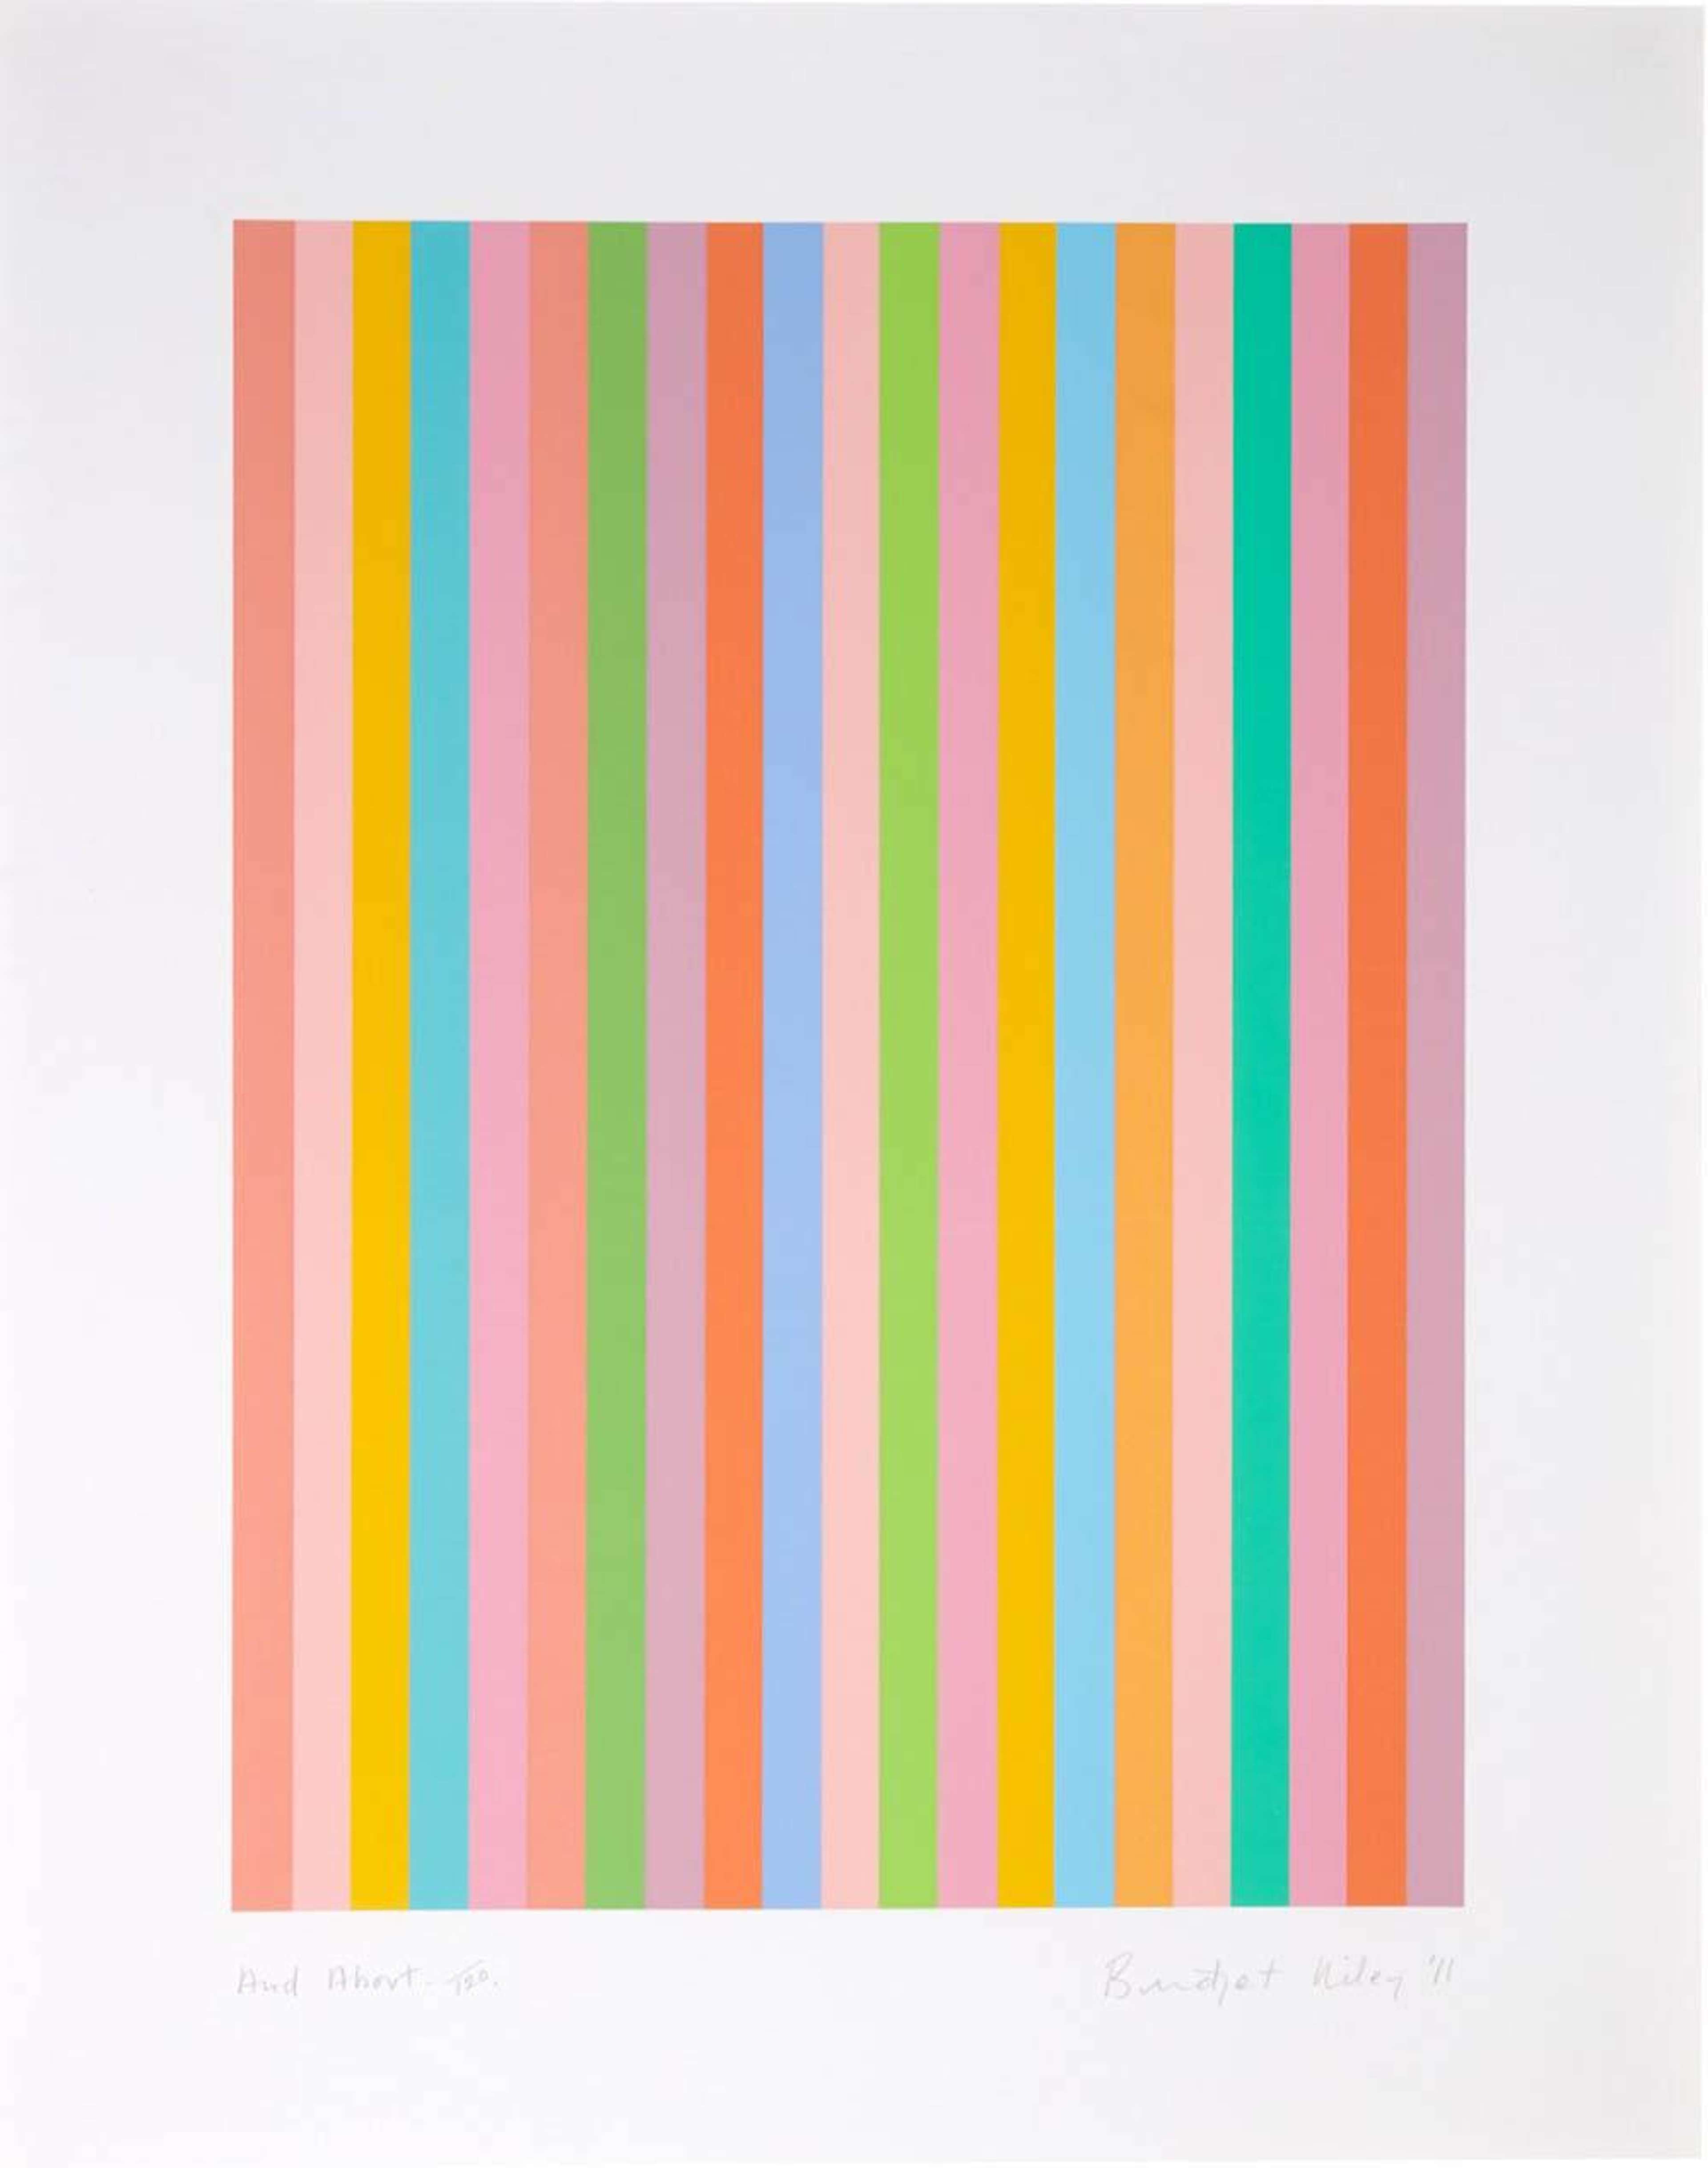 And About - Signed Print by Bridget Riley 2011 - MyArtBroker